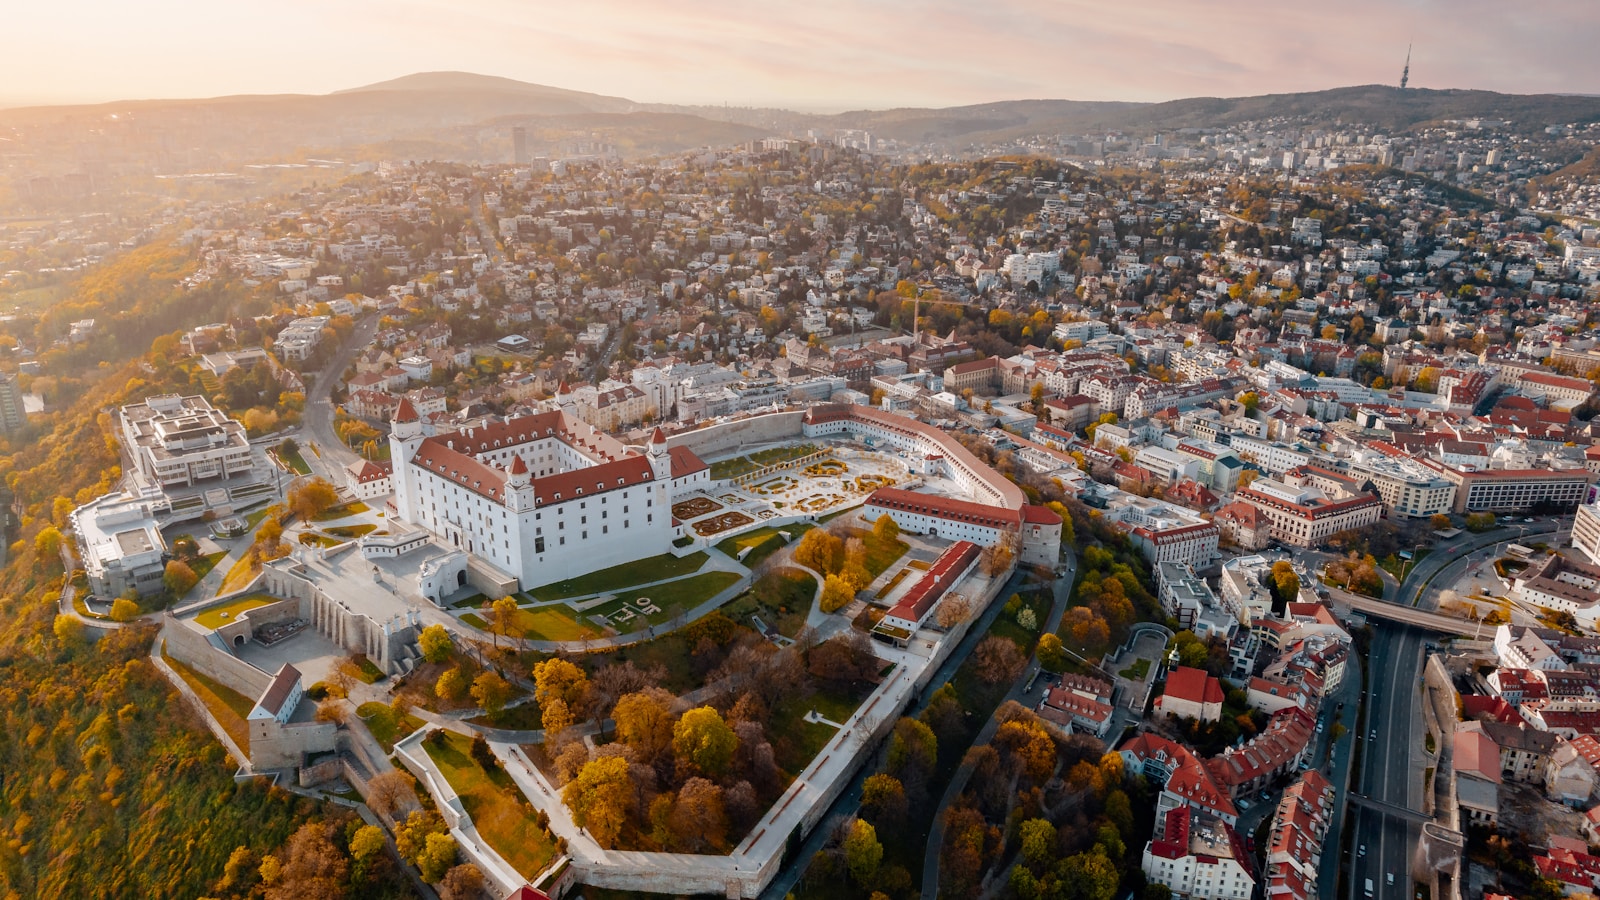 Bratislava aerial view of city during daytime